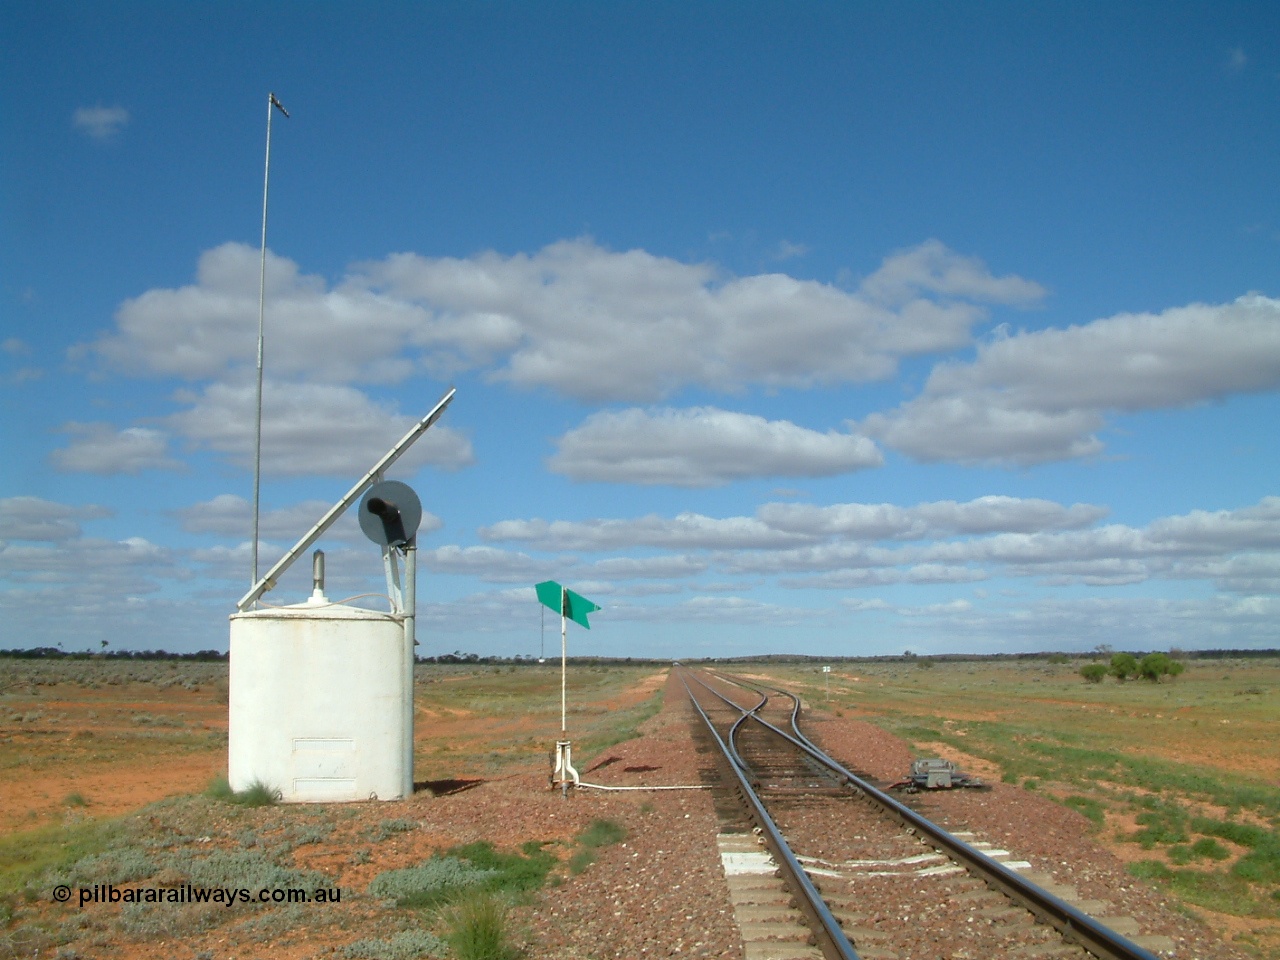 030415 150814
Ferguson, located at the 469 km on the Trans Australian Railway, looking east at the west end of the 1800 metre long crossing loop, point work on timber sleepers, interlocking hut, indicator and lever with dual control point machine on the right. [url=https://goo.gl/maps/XNaMGCNxZ4yv7Lrr9]GeoData location[/url].
